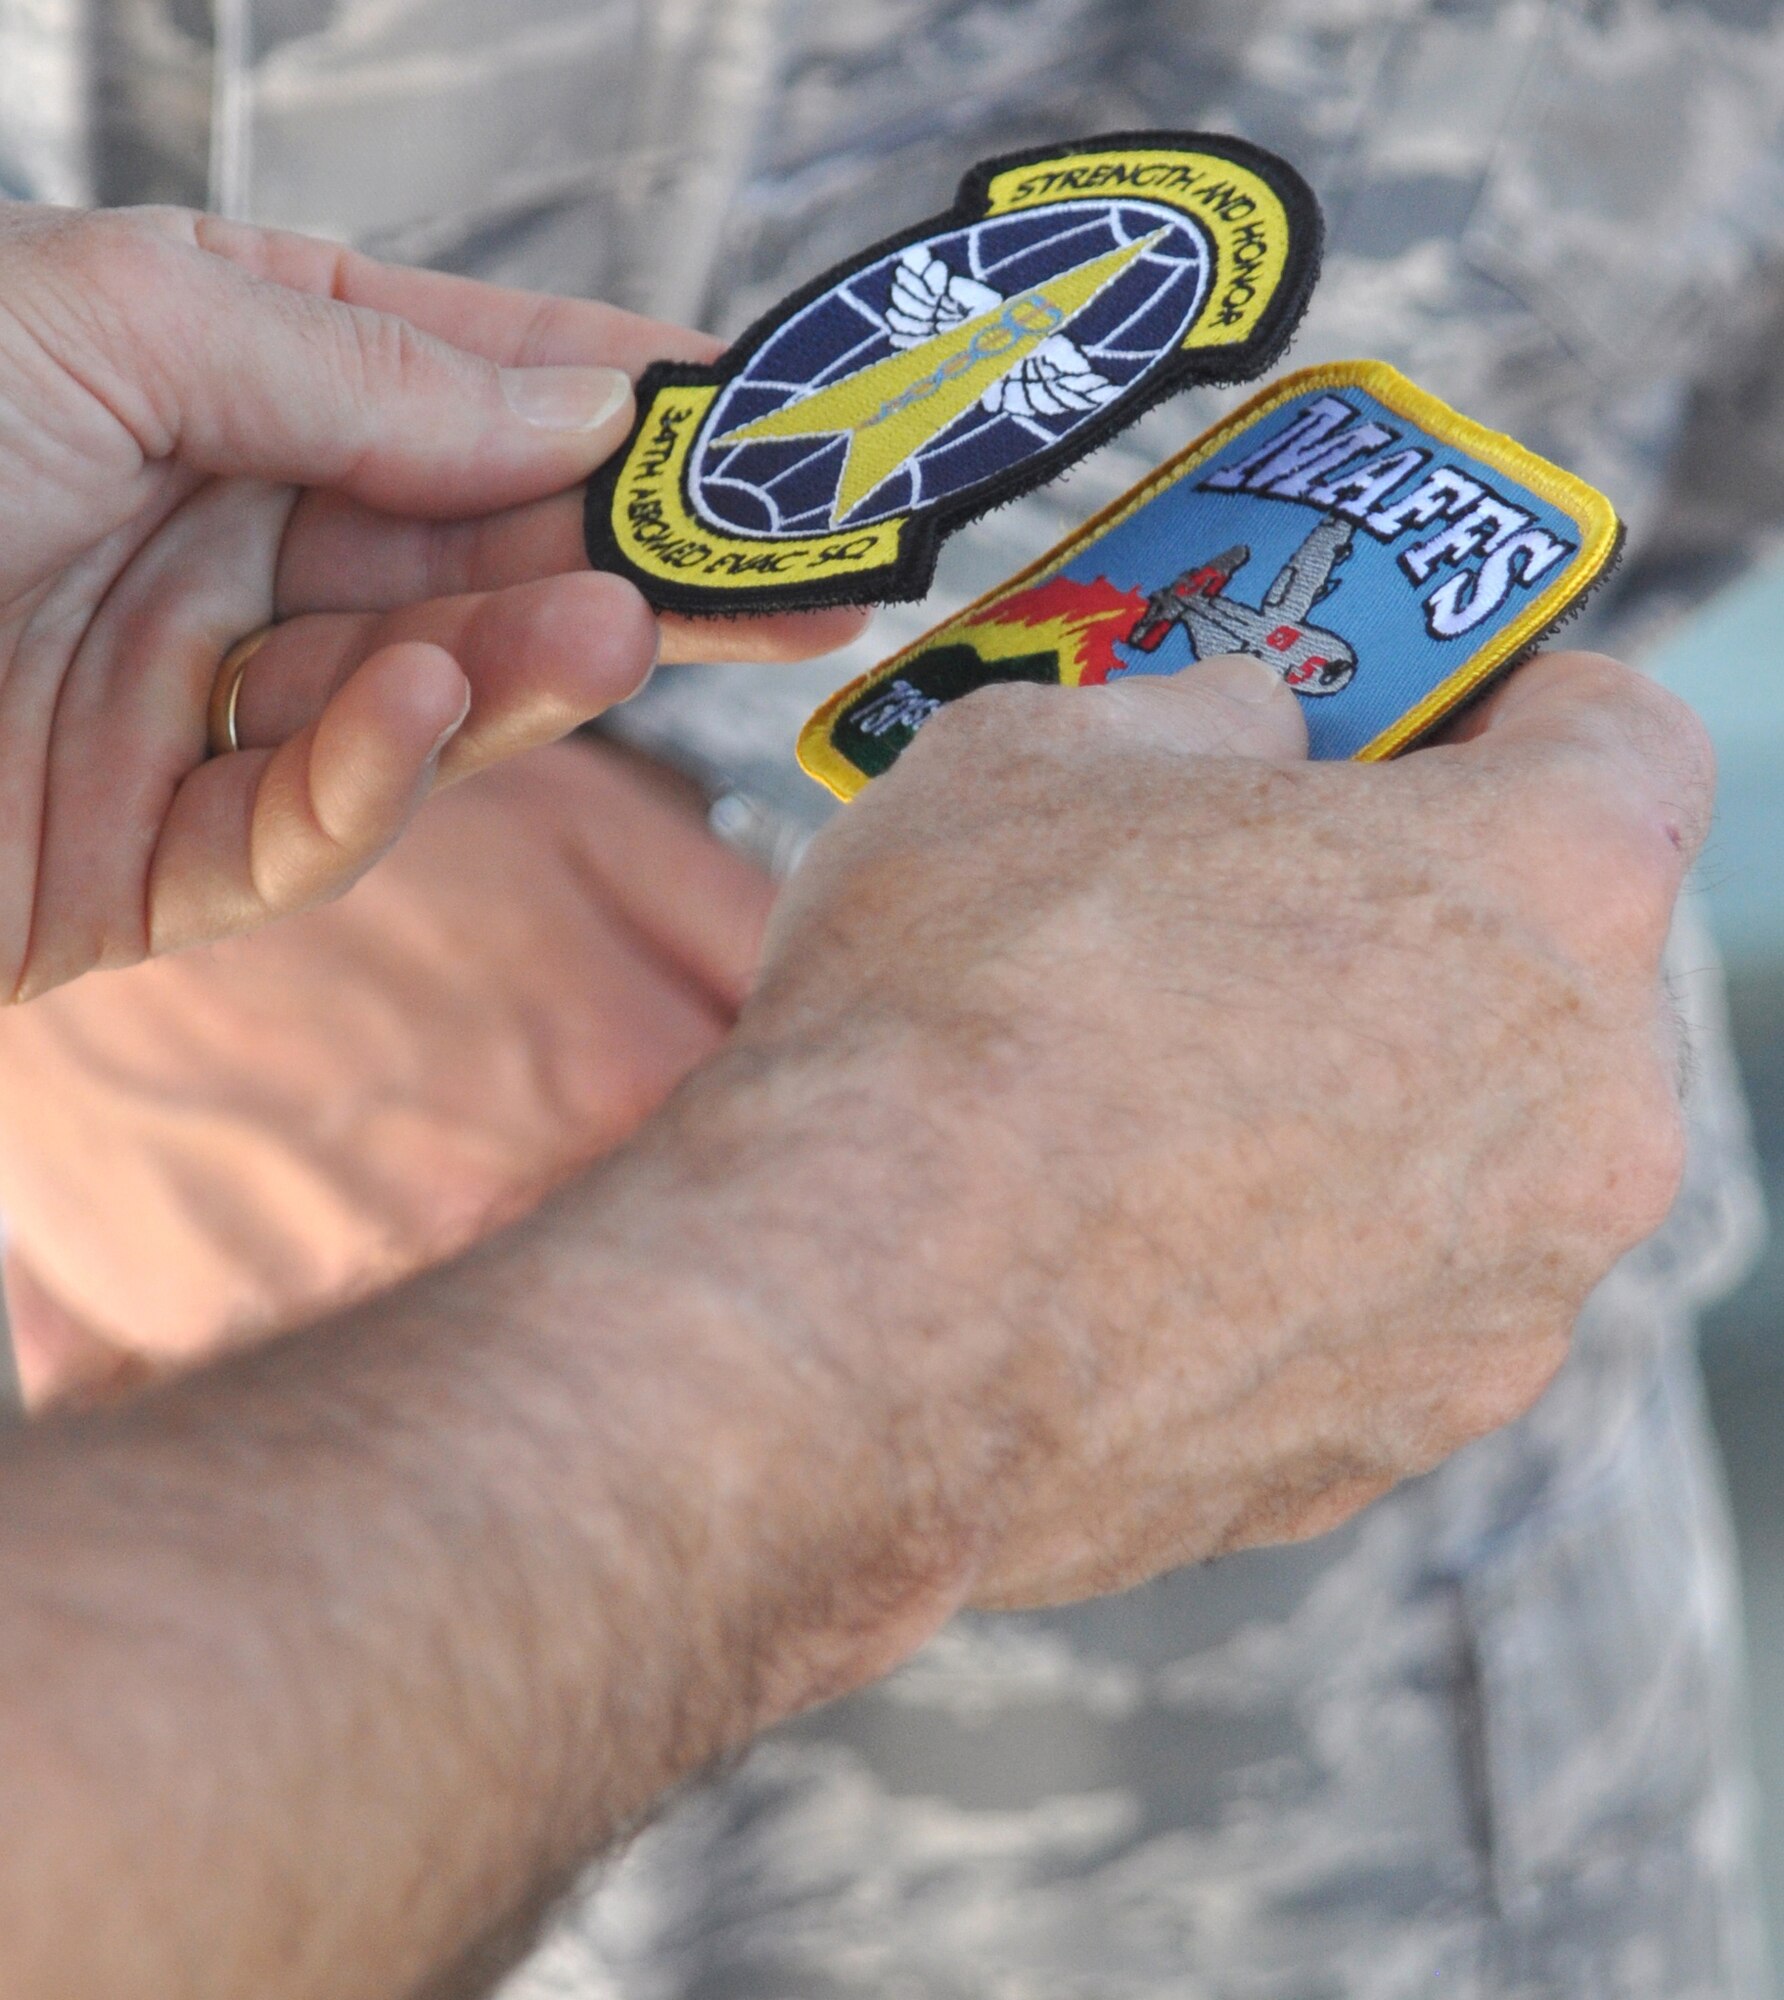 Navy Adm. James A. Winnefeld, Jr., holds both the 34th Aeromedical Evacuation Squadron and the 302nd Airlift Wing’s Modular Airborne Firefighting System patches in his hand after being presented them from 302nd AW leadership July 26 at Peterson Air Force Base, Colo. Admiral Winnefeld, commander of the North American Aerospace Defense Command and U.S. Northern Command, together with senior leaders from both organizations, visited the Air Force Reserve’s 302nd AW to gain a better understanding of the specialized missions the AF Reserve supports, to include aeromedical evacuation and aerial firefighting. The visit also showcased the capabilities Air Force Reservists can provide to civilian-related missions if called upon. (U.S. Air Force photo/Staff Sgt. Stephen J. Collier)